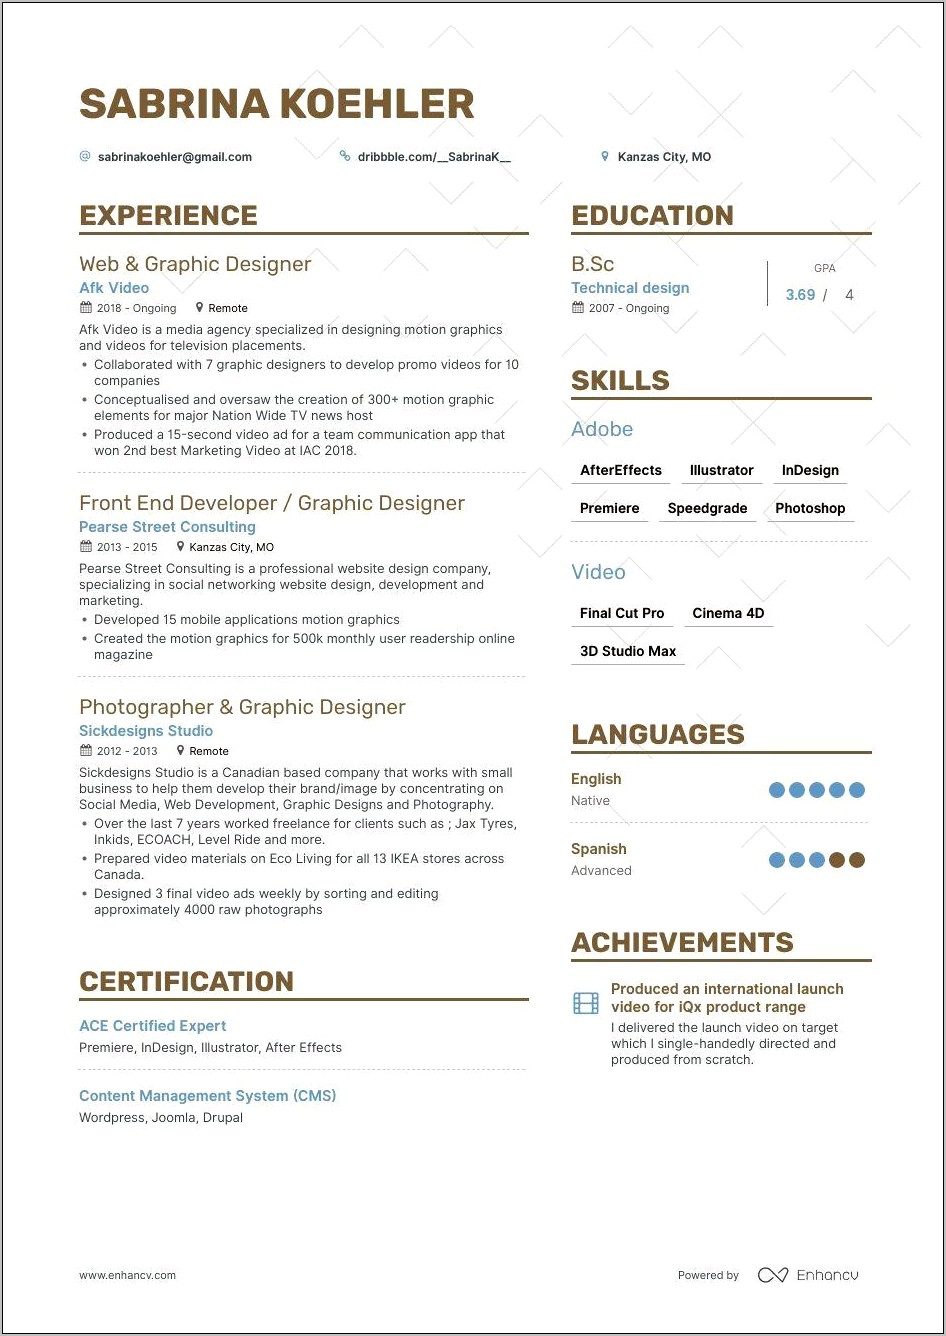 Graphic Design Contract Work Resume Bulletpoints